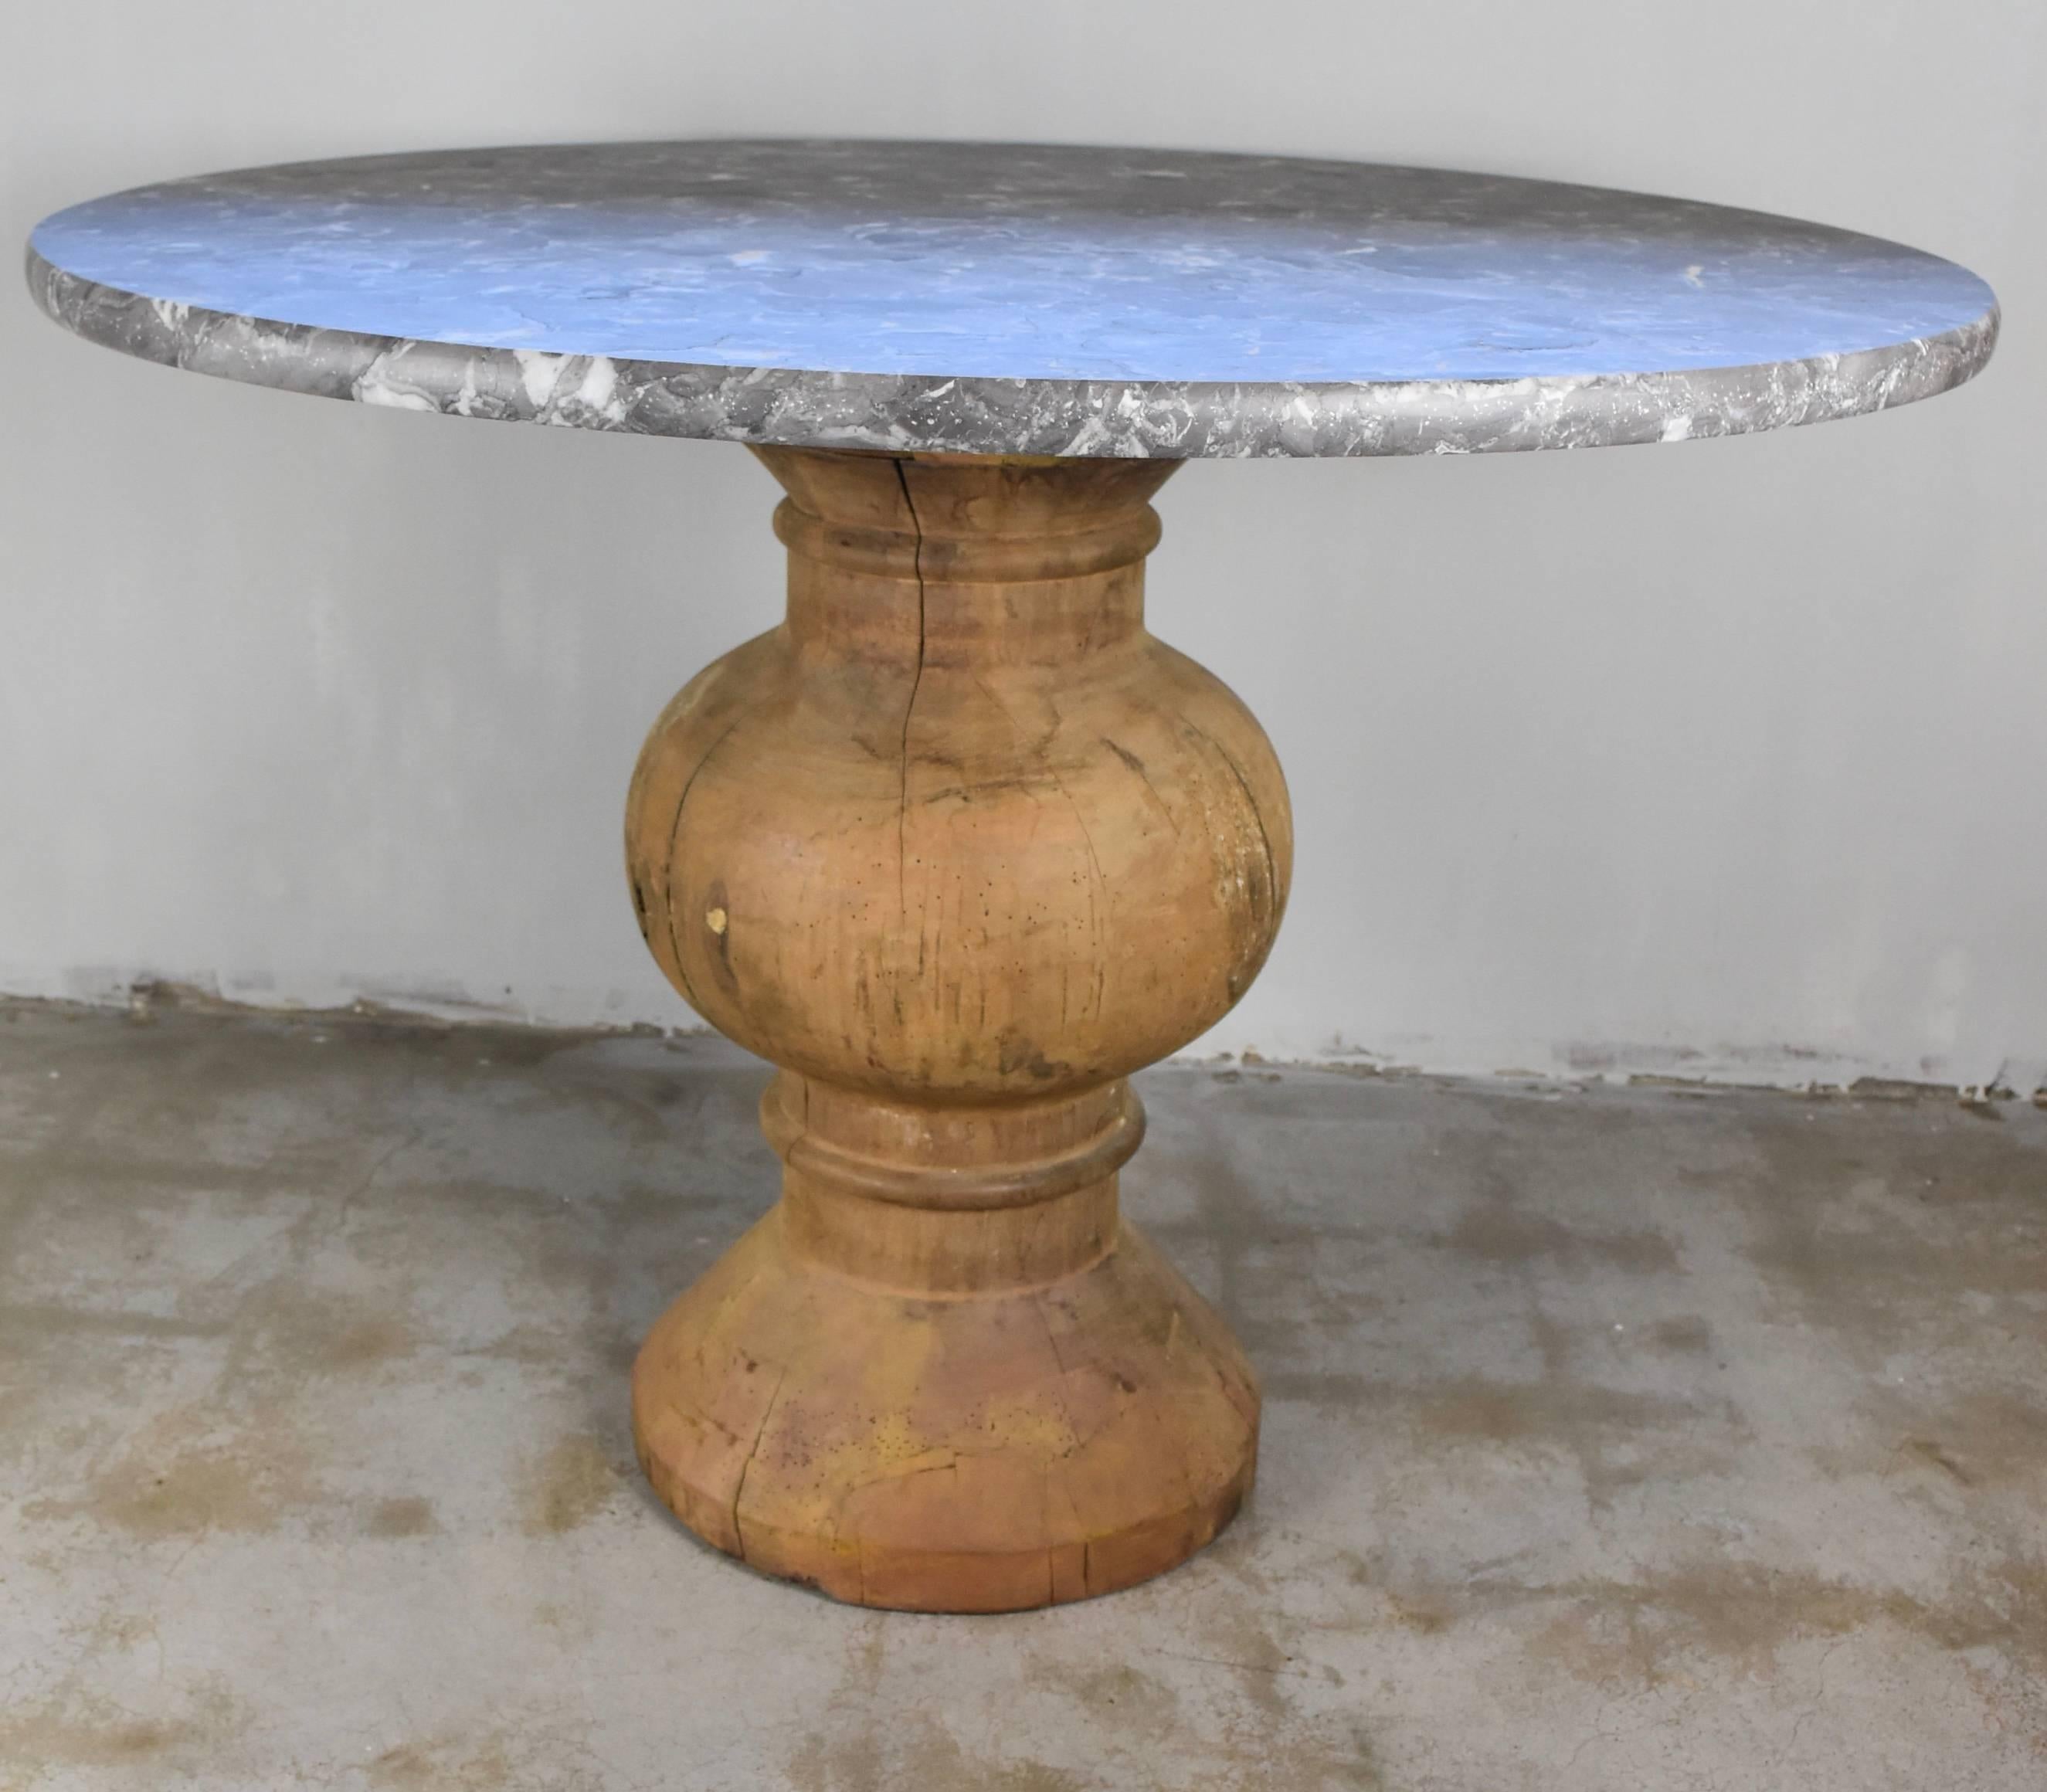 This is to die for Pedestal table with belgian blue stone marble that is actually gray. It's from the 19th century purchased in France. It makes for a great entry table or breakfast table will seat 5 people.